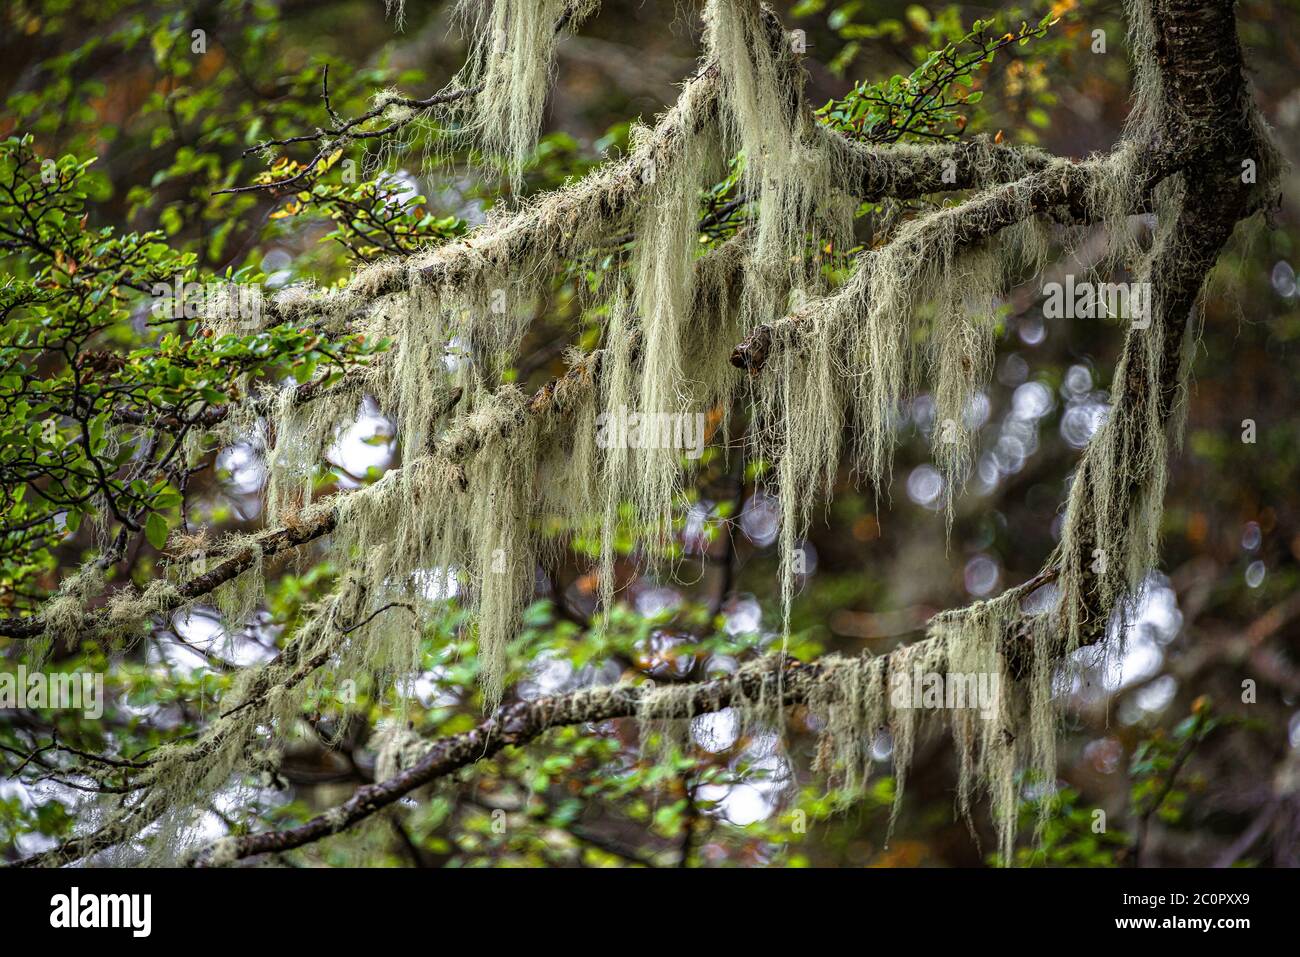 Patagonian lichen Usnea, Old Man Beard, hanging from the branches of the Nothofagus trees in magical austral forest in Tierra del Fuego National Park, Stock Photo